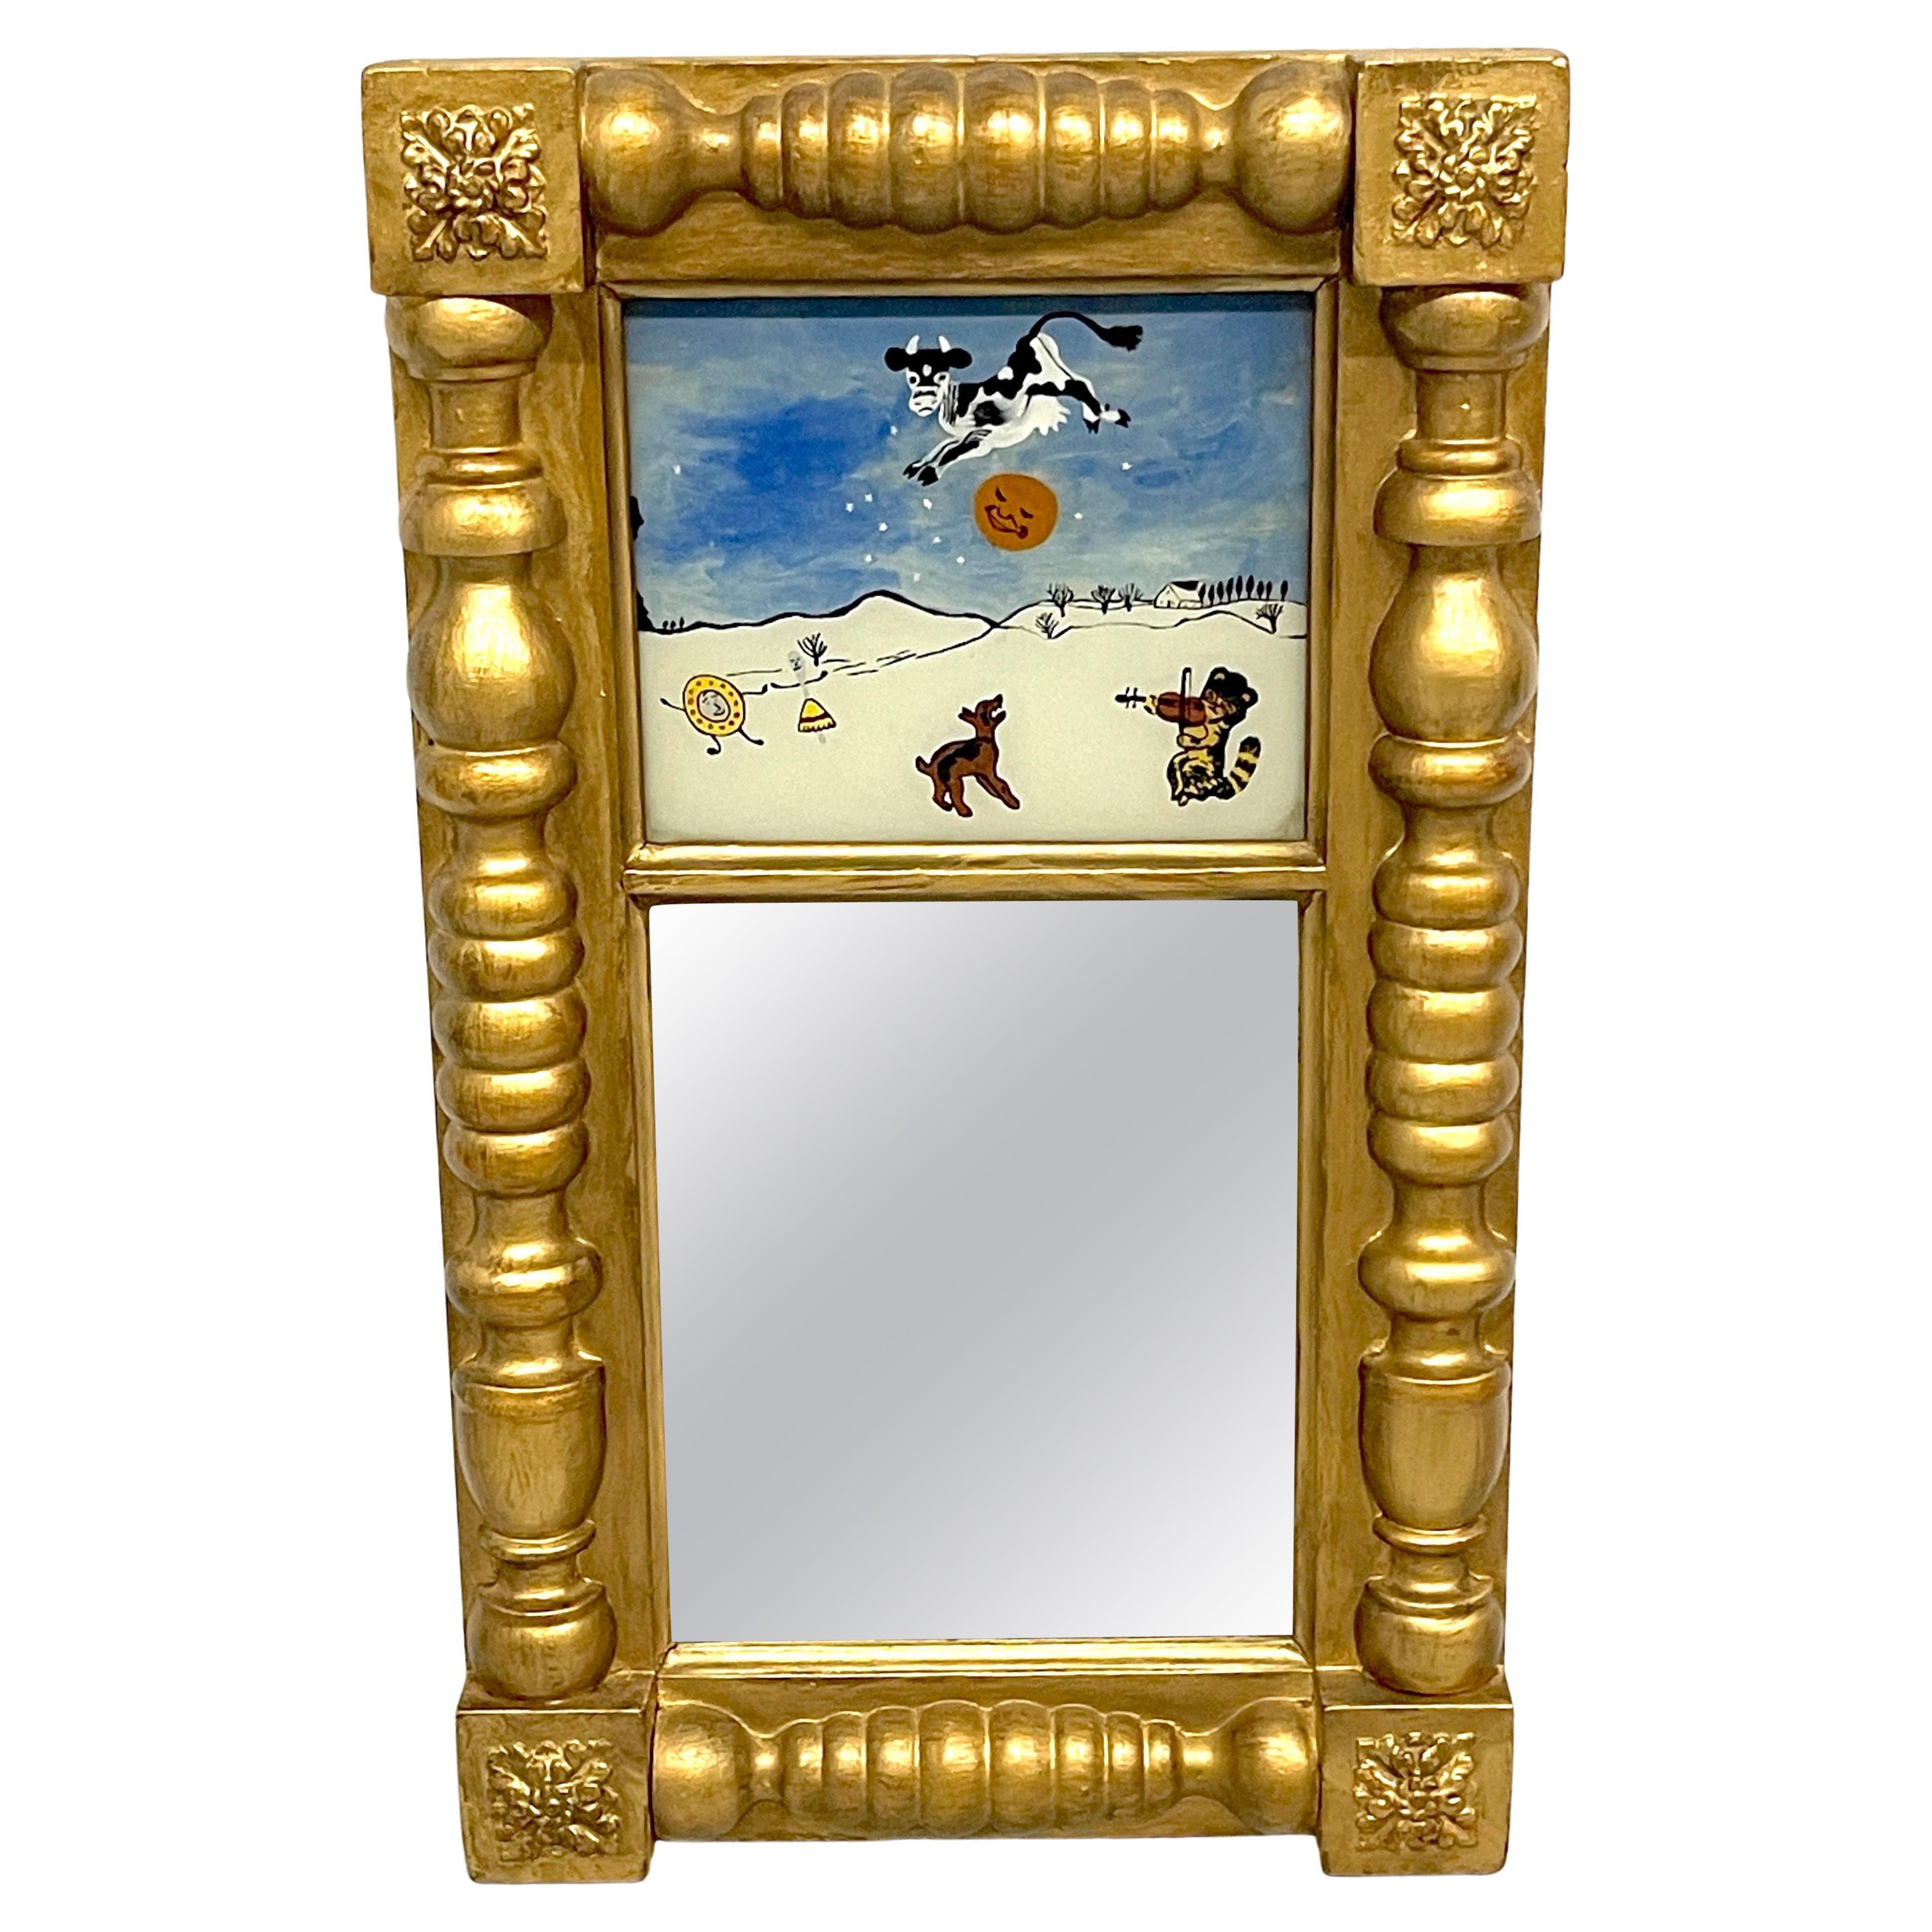 Antique English Reverse Painted 'Hey Diddle Diddle' Eglomise Child's Mirror